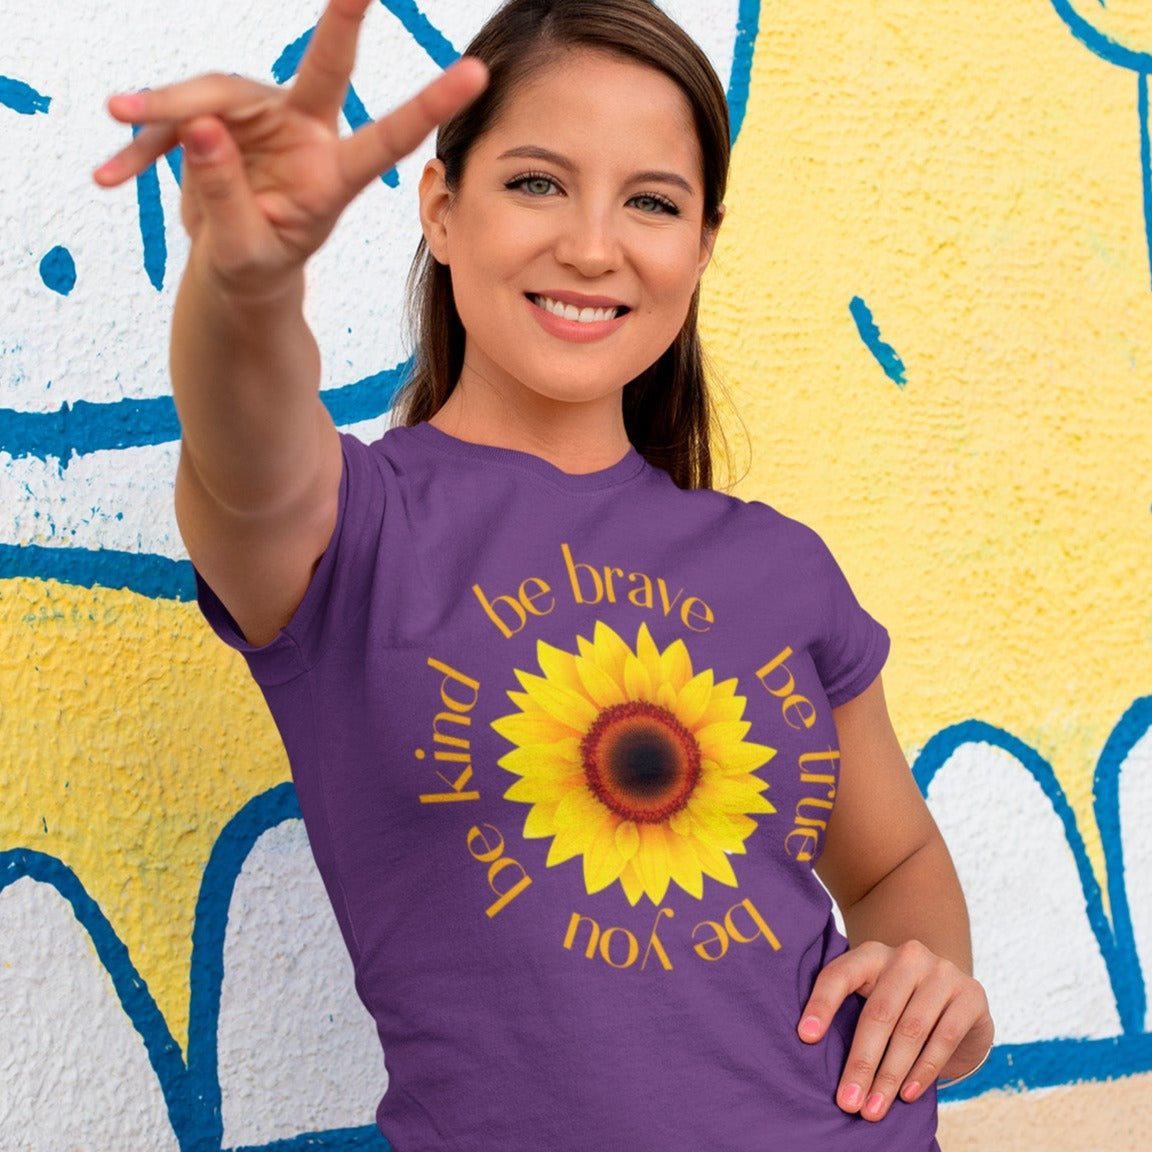 be-true-be-you-be-kind-be-brave-team-purple-t-shirt-sunflower-womens-shirt-mockup-of-a-woman-doing-the-peace-sign-against-a-street-art-wall